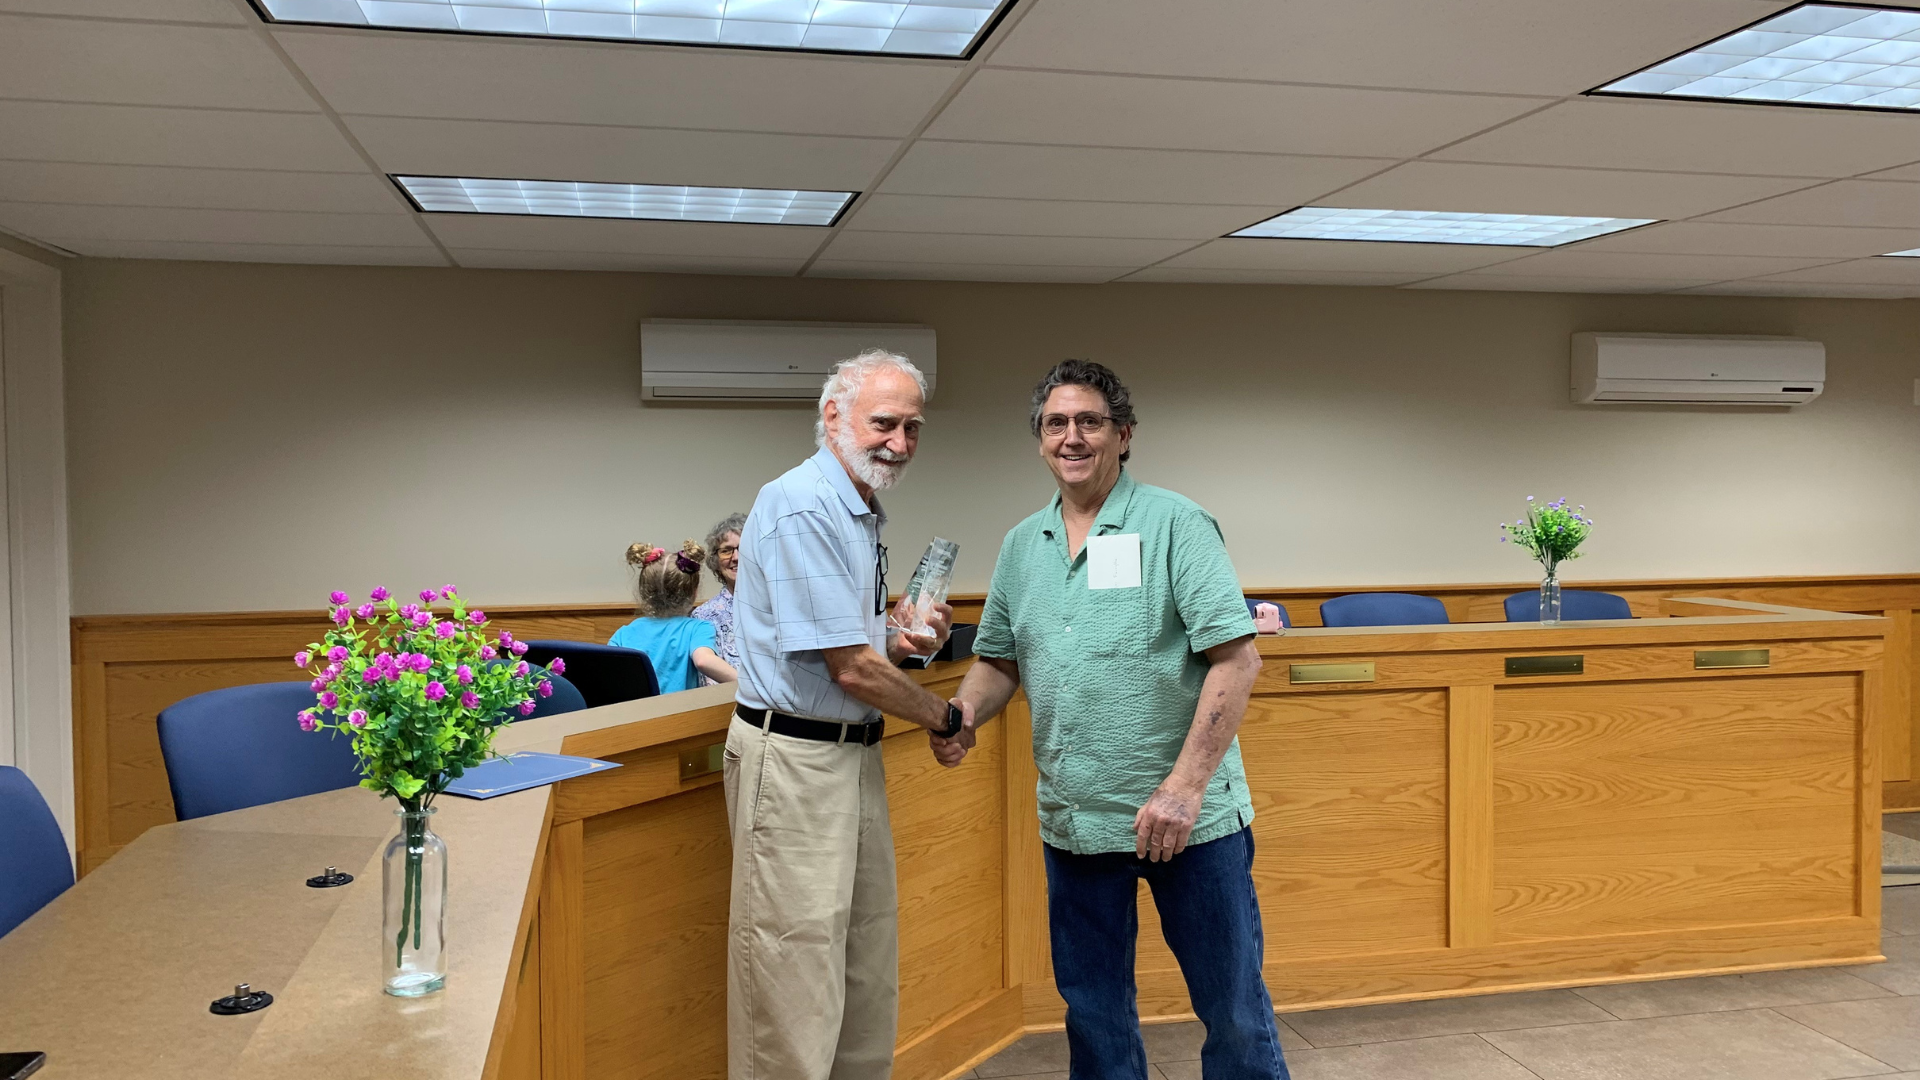 Judge Pultz Recognized for 33 Years of Service